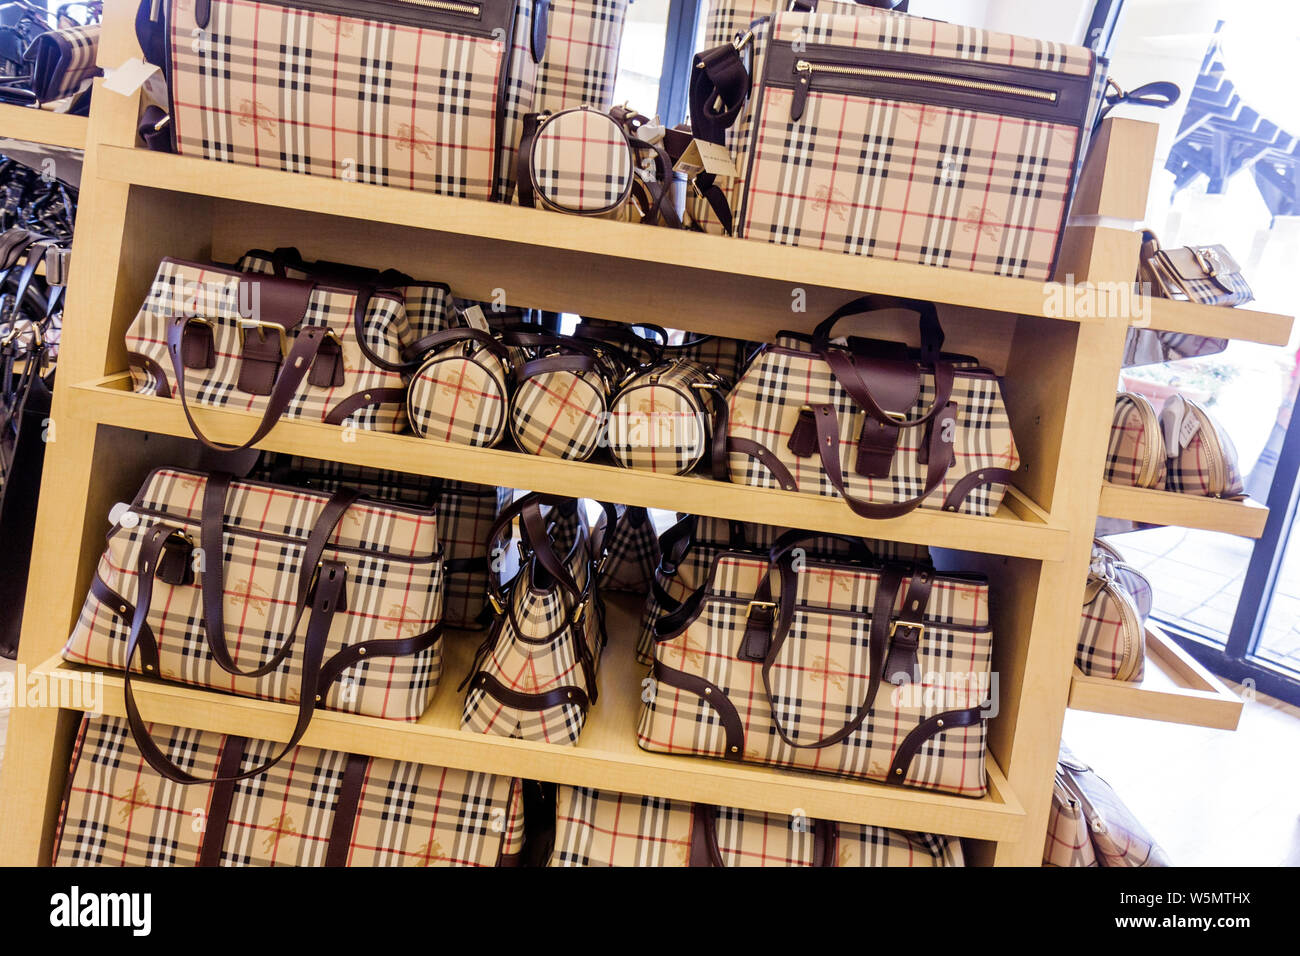 Fort Ft. Lauderdale Florida,Coral Springs,Sawgrass Mall,Burberry. British  company,luxury,well  dressed,store,stores,businesses,district,outlet,upmarket Stock Photo - Alamy